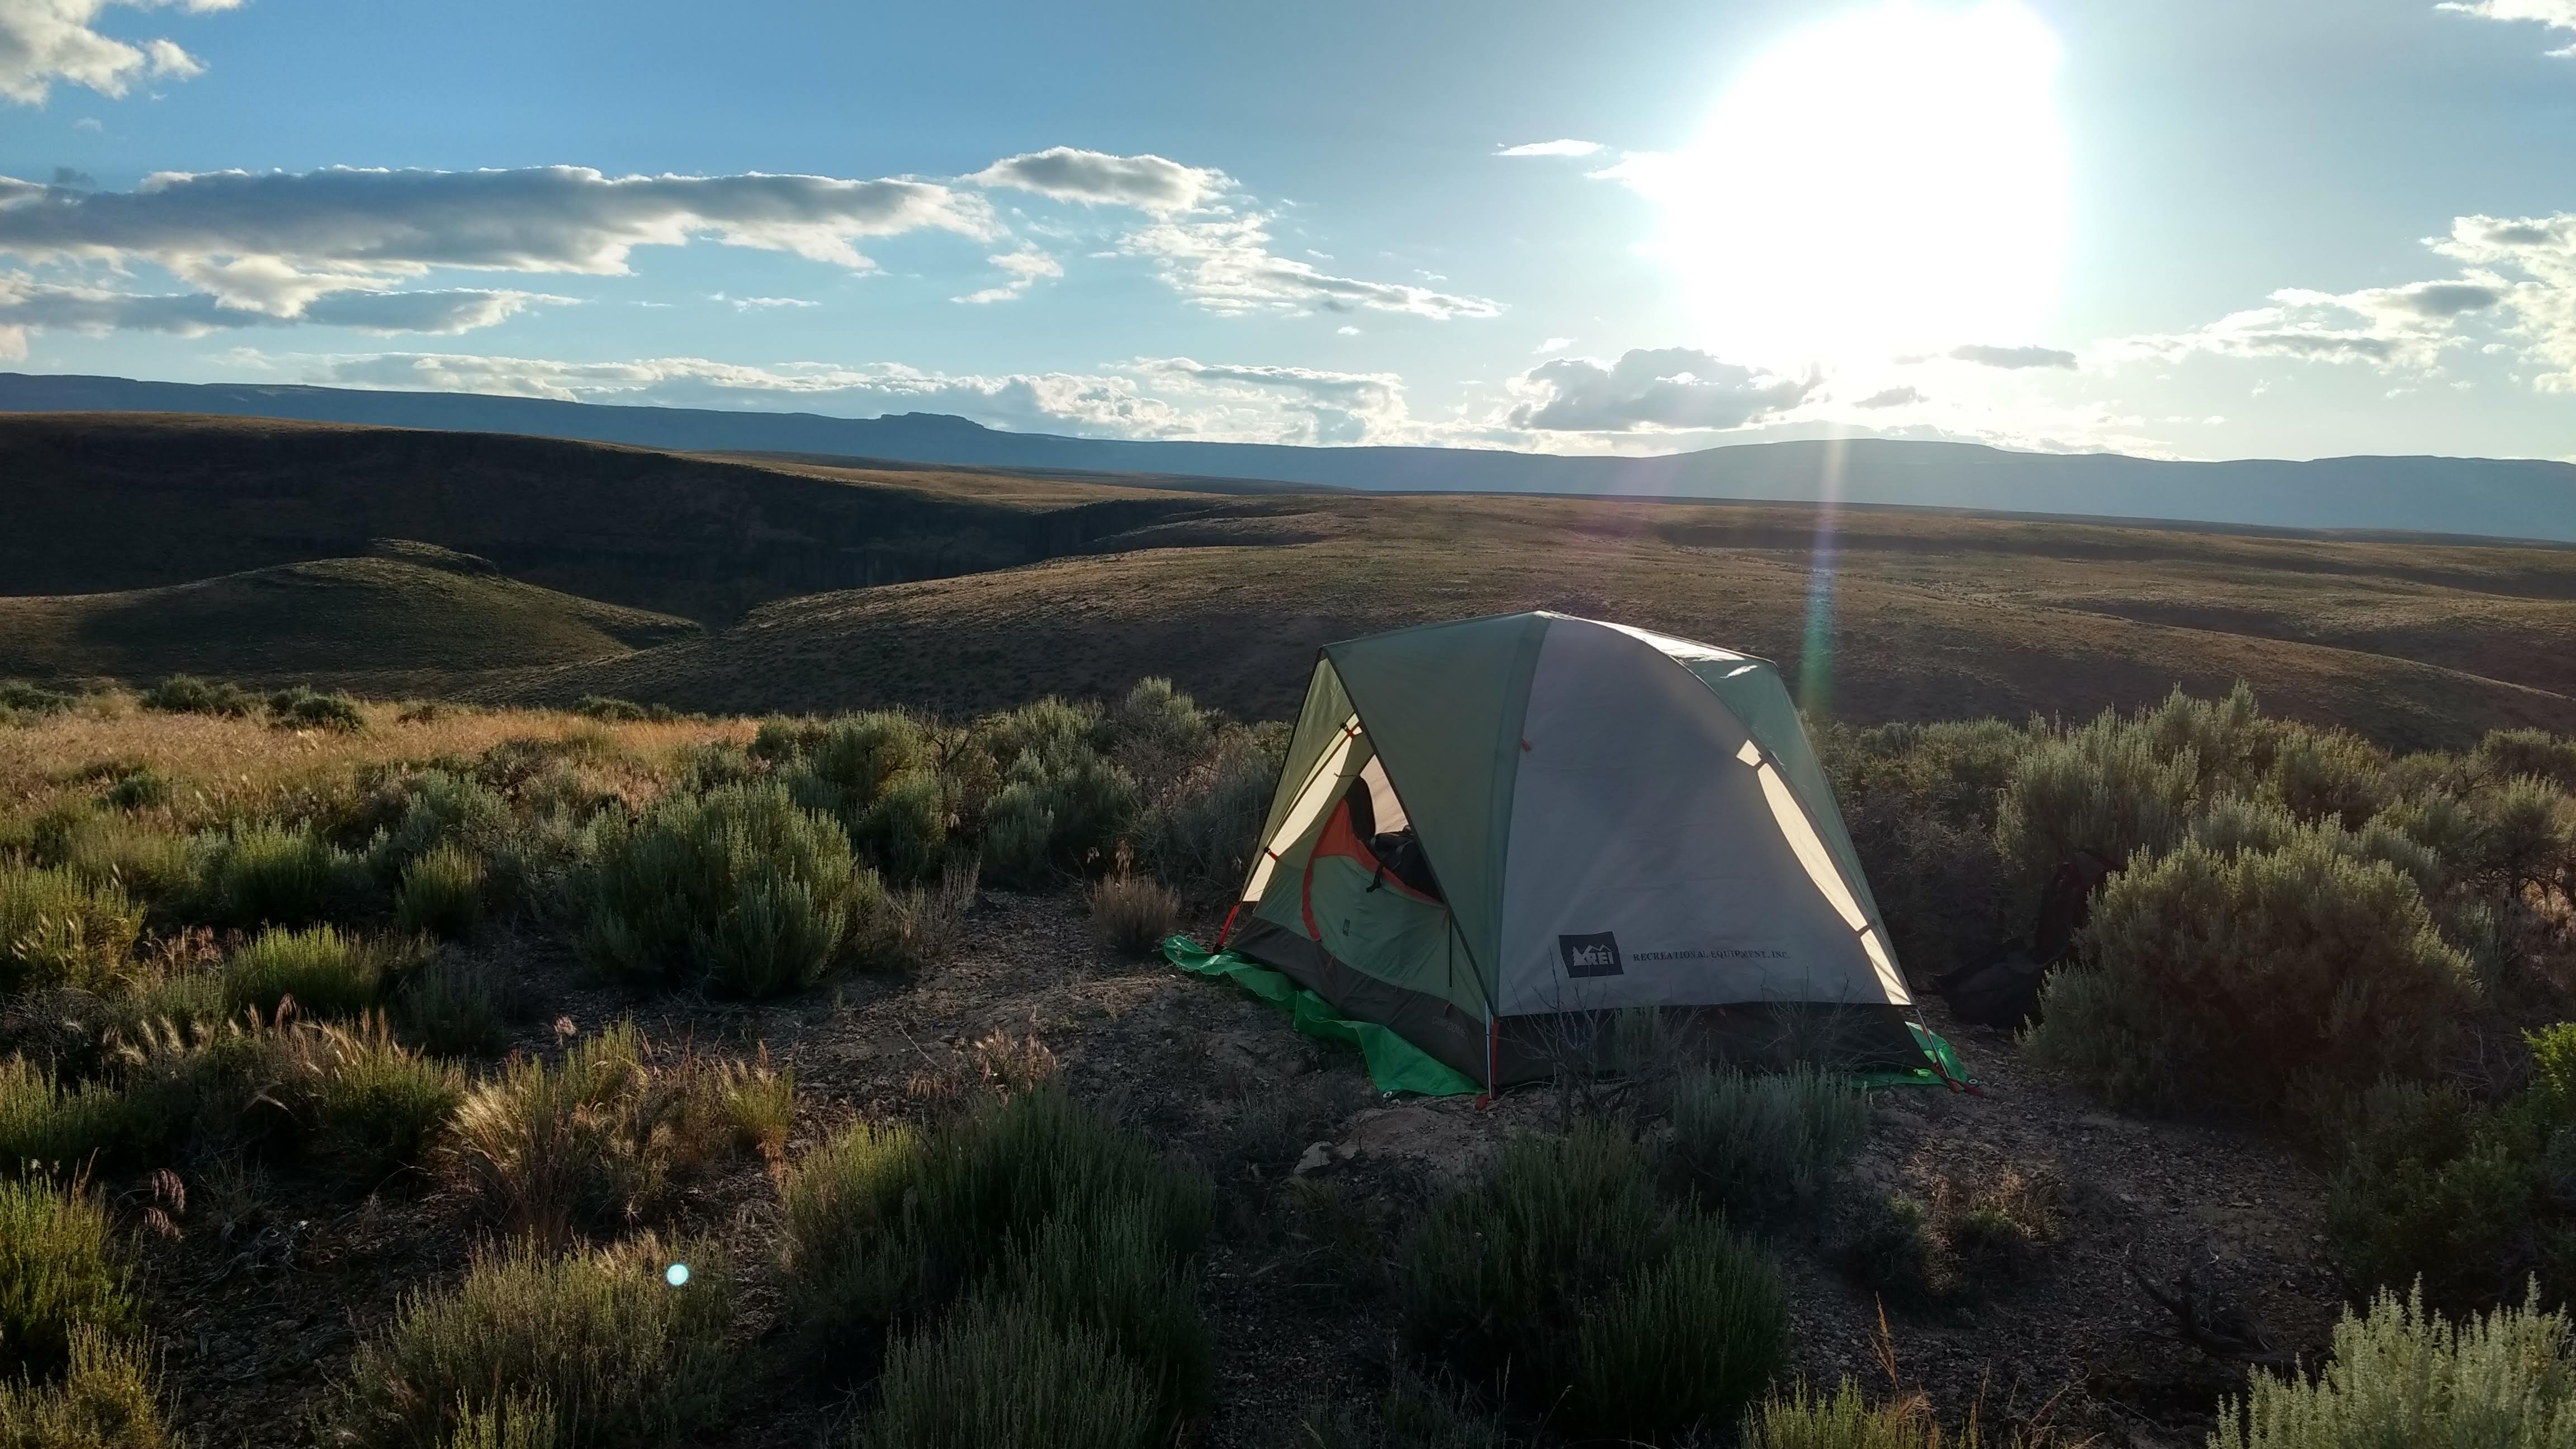 My Tent and a Sunrise over Sagebrush, June 2017.